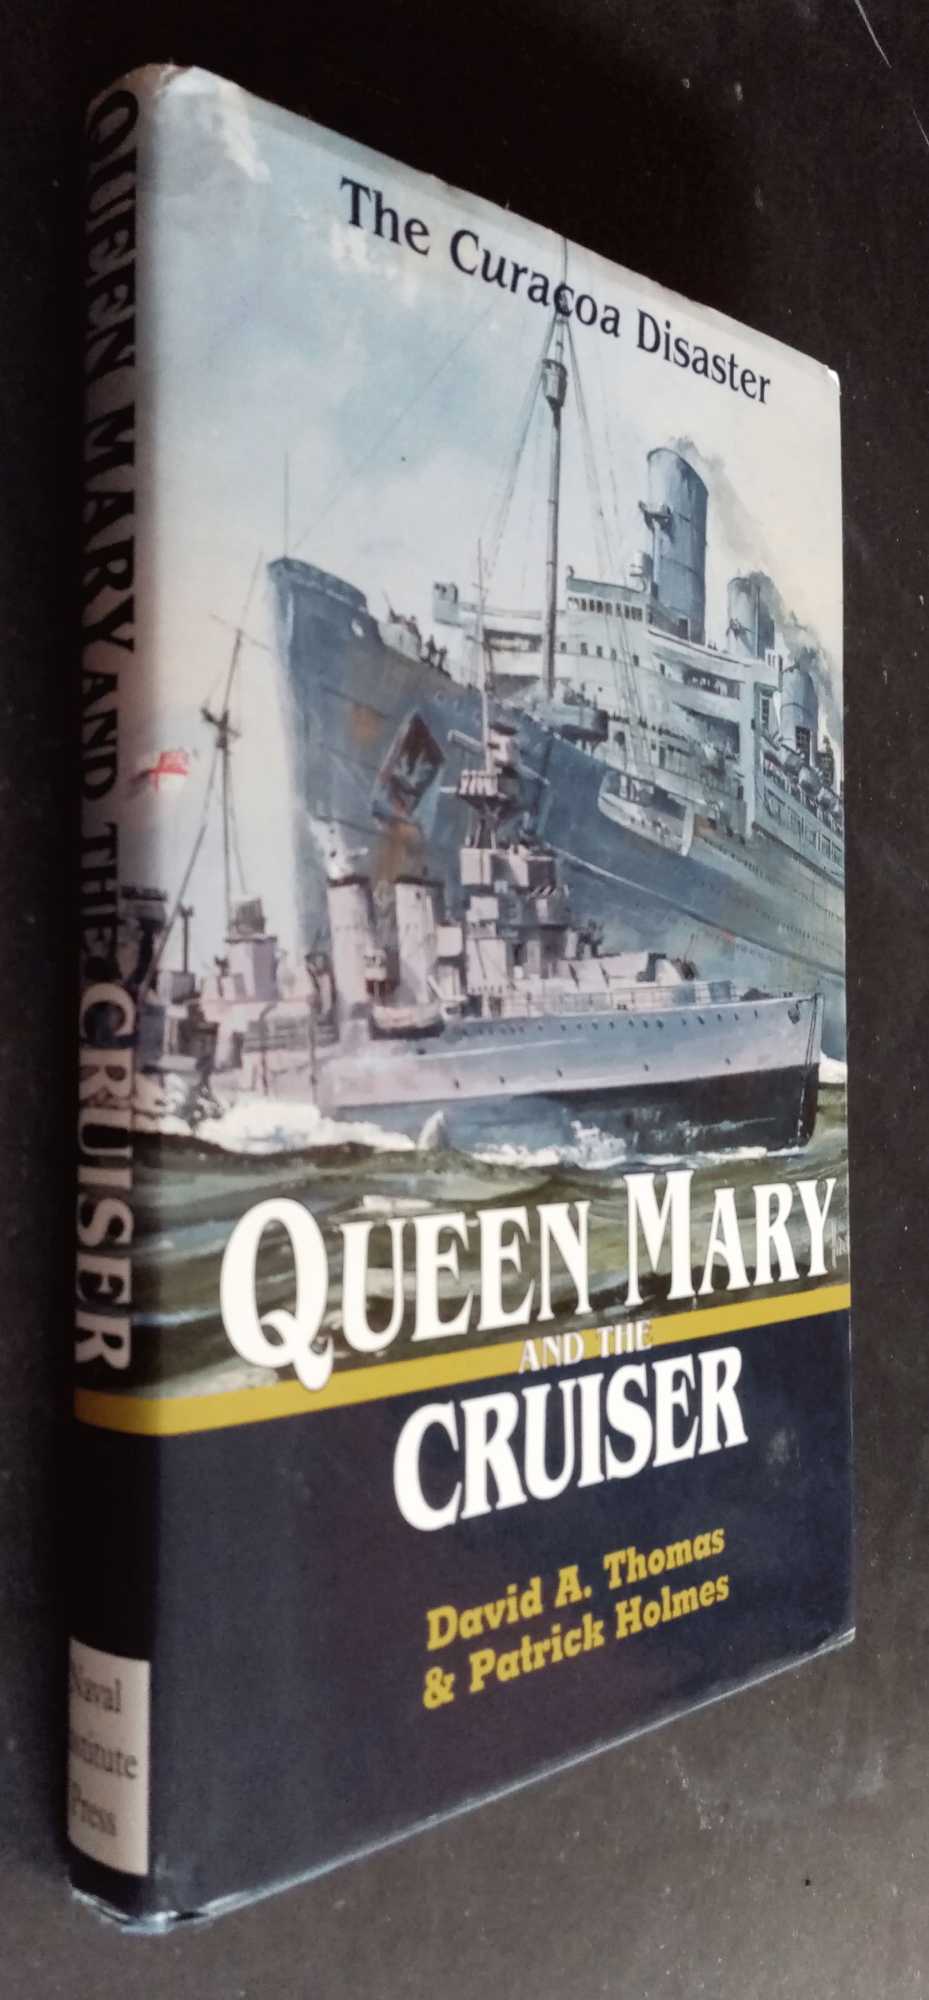 David Thomas - Queen Mary and the Cruiser: The Curacoa Disaster